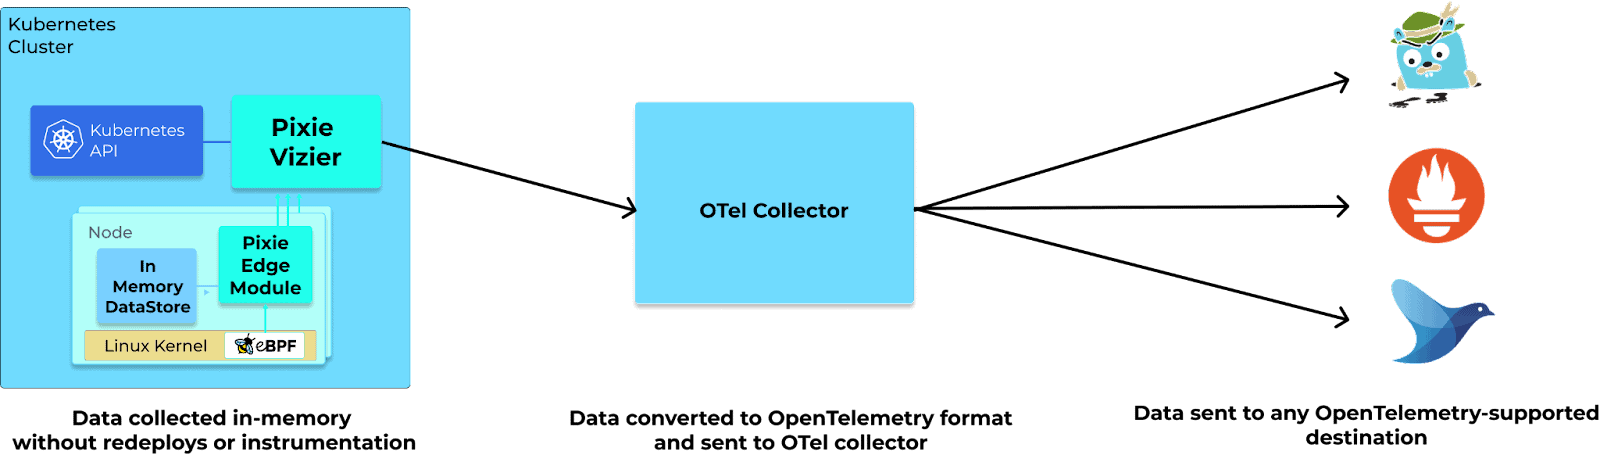 Diagram showing data collected in-memory without redeploys or instrumentation to data converted to OpenTelemetry format and sent to OTel collector and then data sent to any OpenTelemetry supported destination